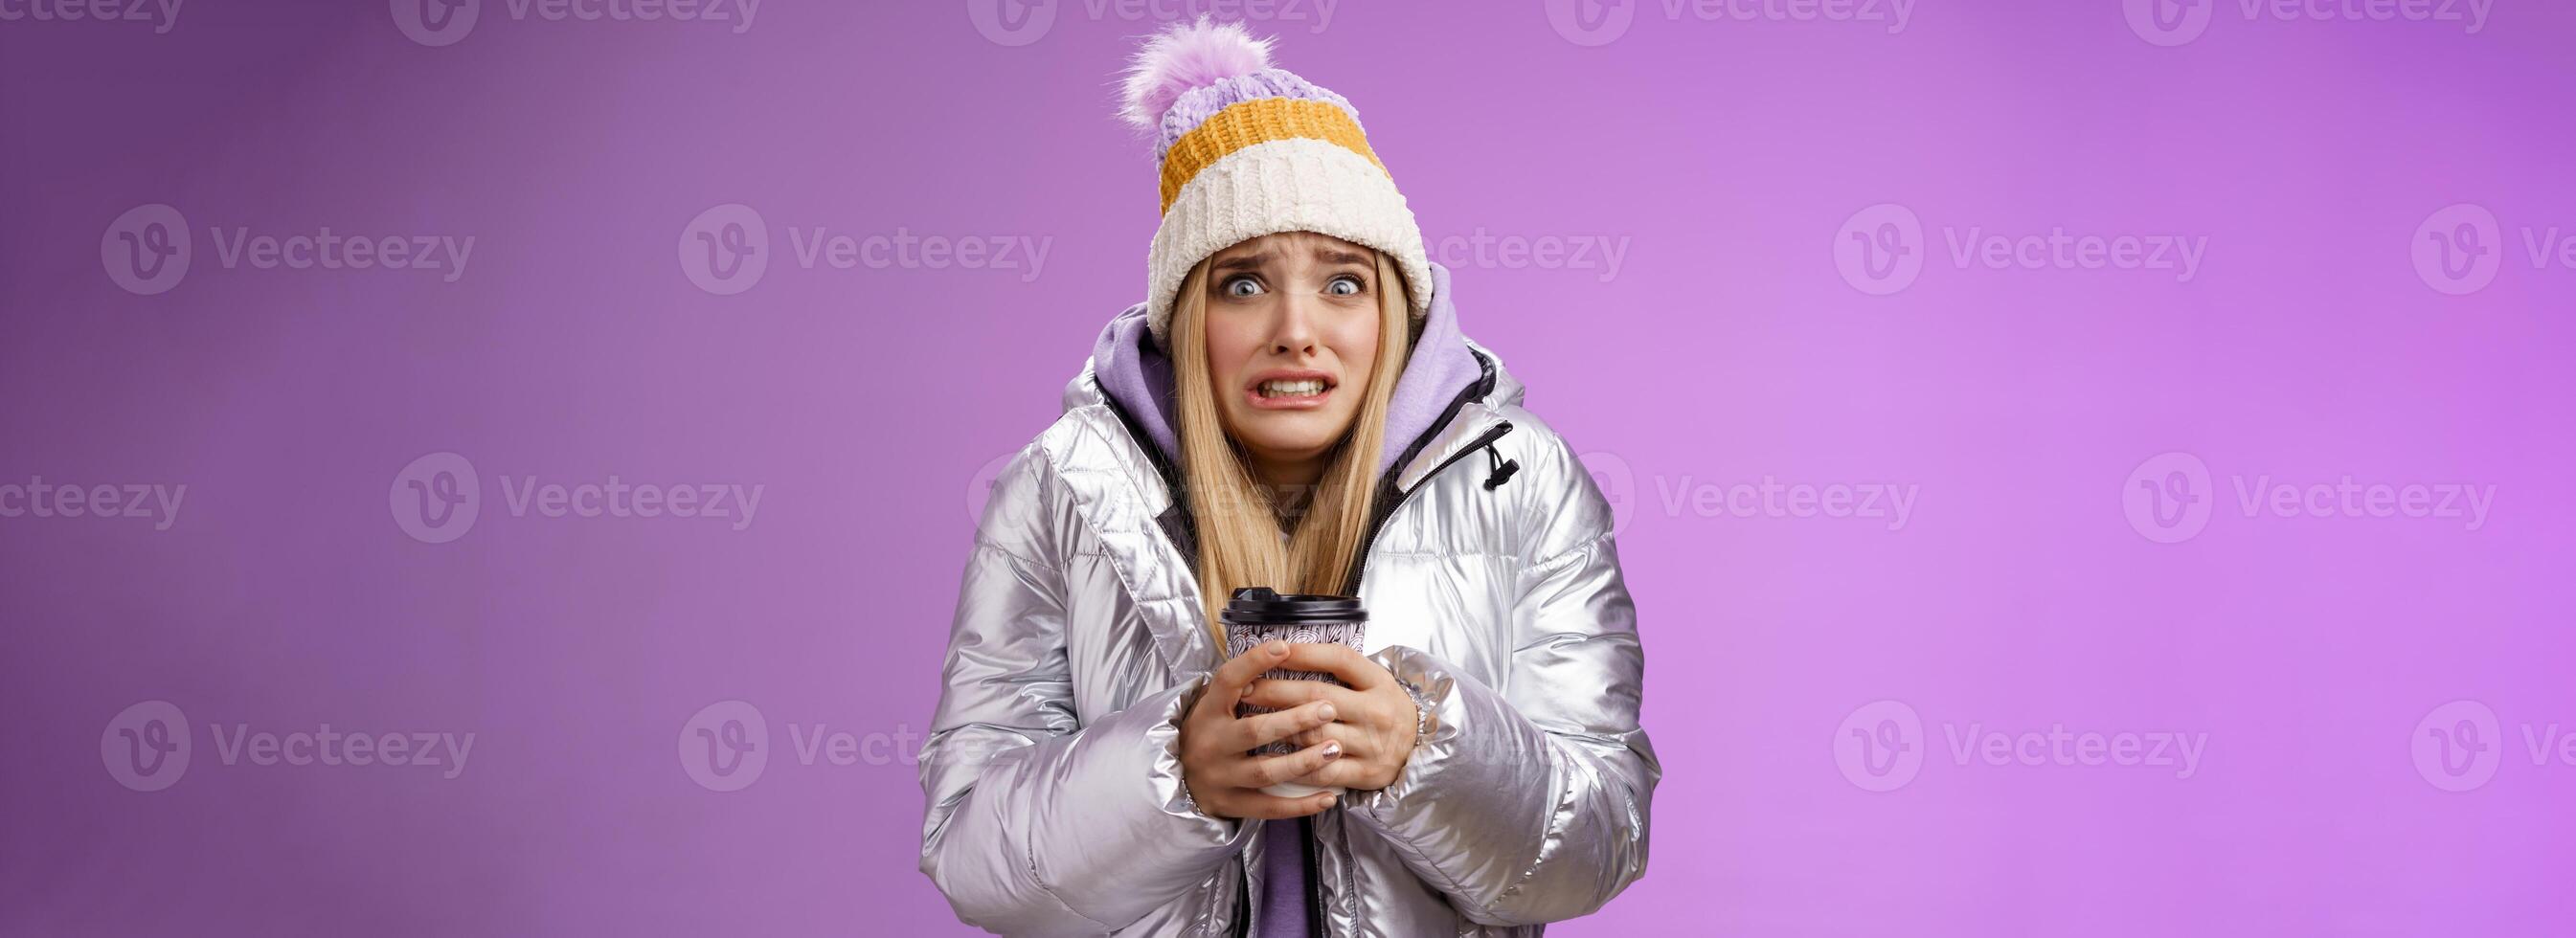 Shaking uncomfortable displeased girl wearing stylish silver jacket hat trembling freezing cold warm hands holding take-away coffee cup clench teeth pop eyes discomfort, standing purple background photo